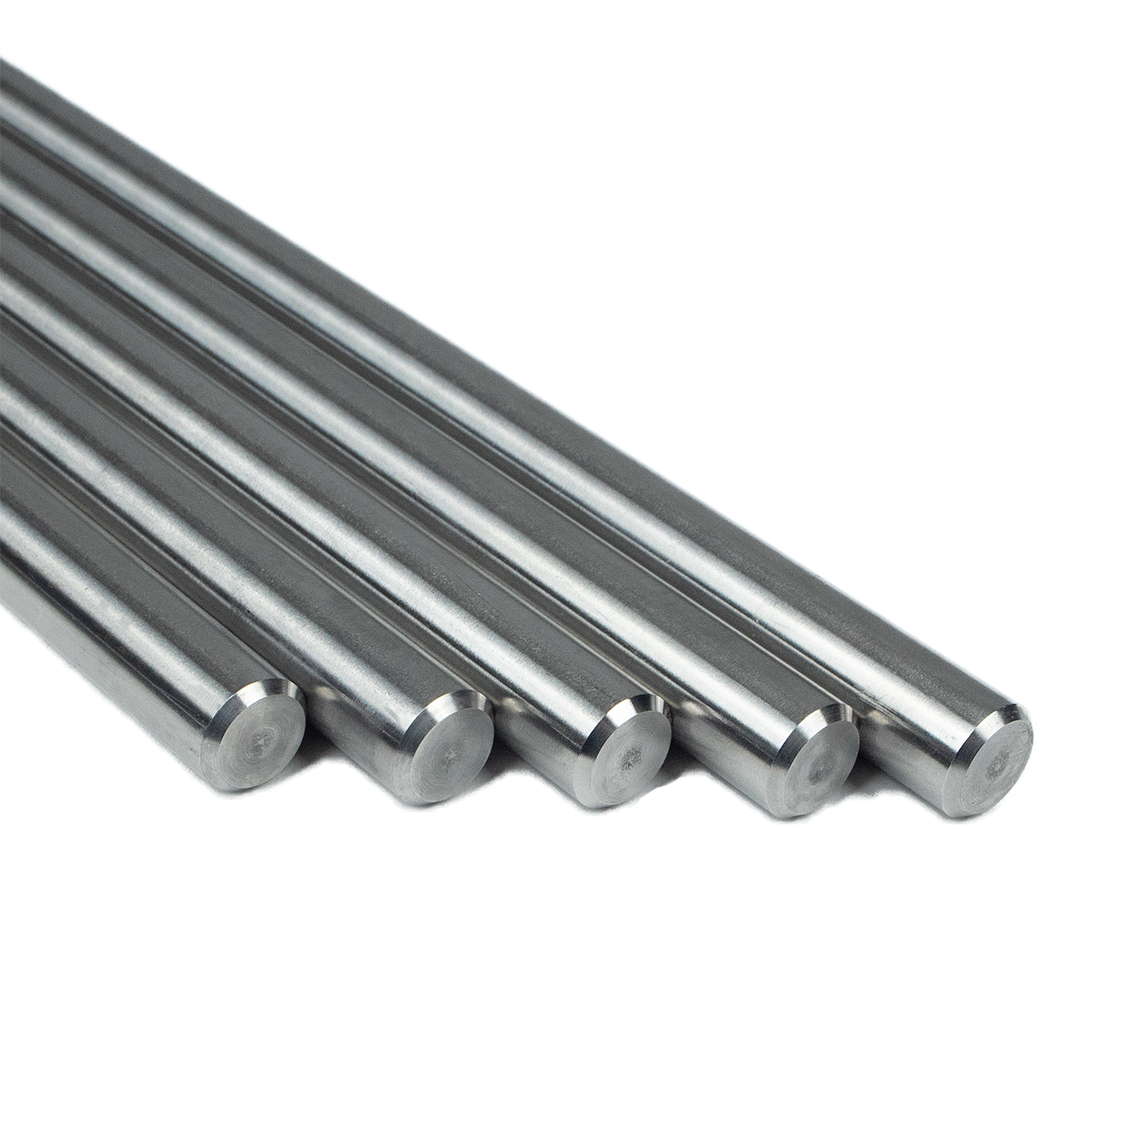 Stand Rod - Ø 15 mm, length 1250 mm - stainless steel